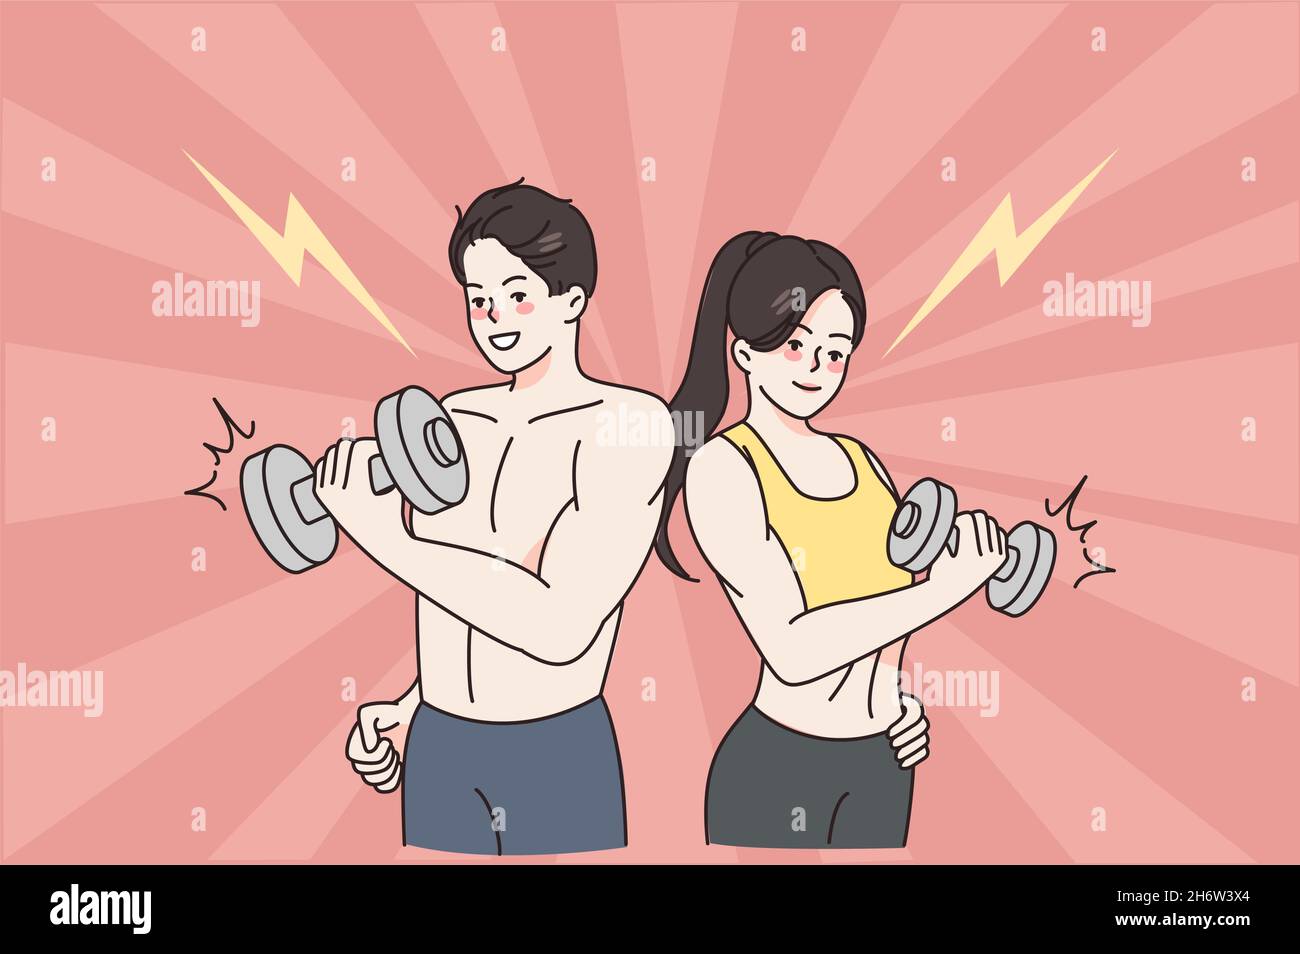 Sporty active lifestyle and workout concept. Young positive couple man and woman standing wearing sportswear holding dumbbels during training vector illustration  Stock Vector